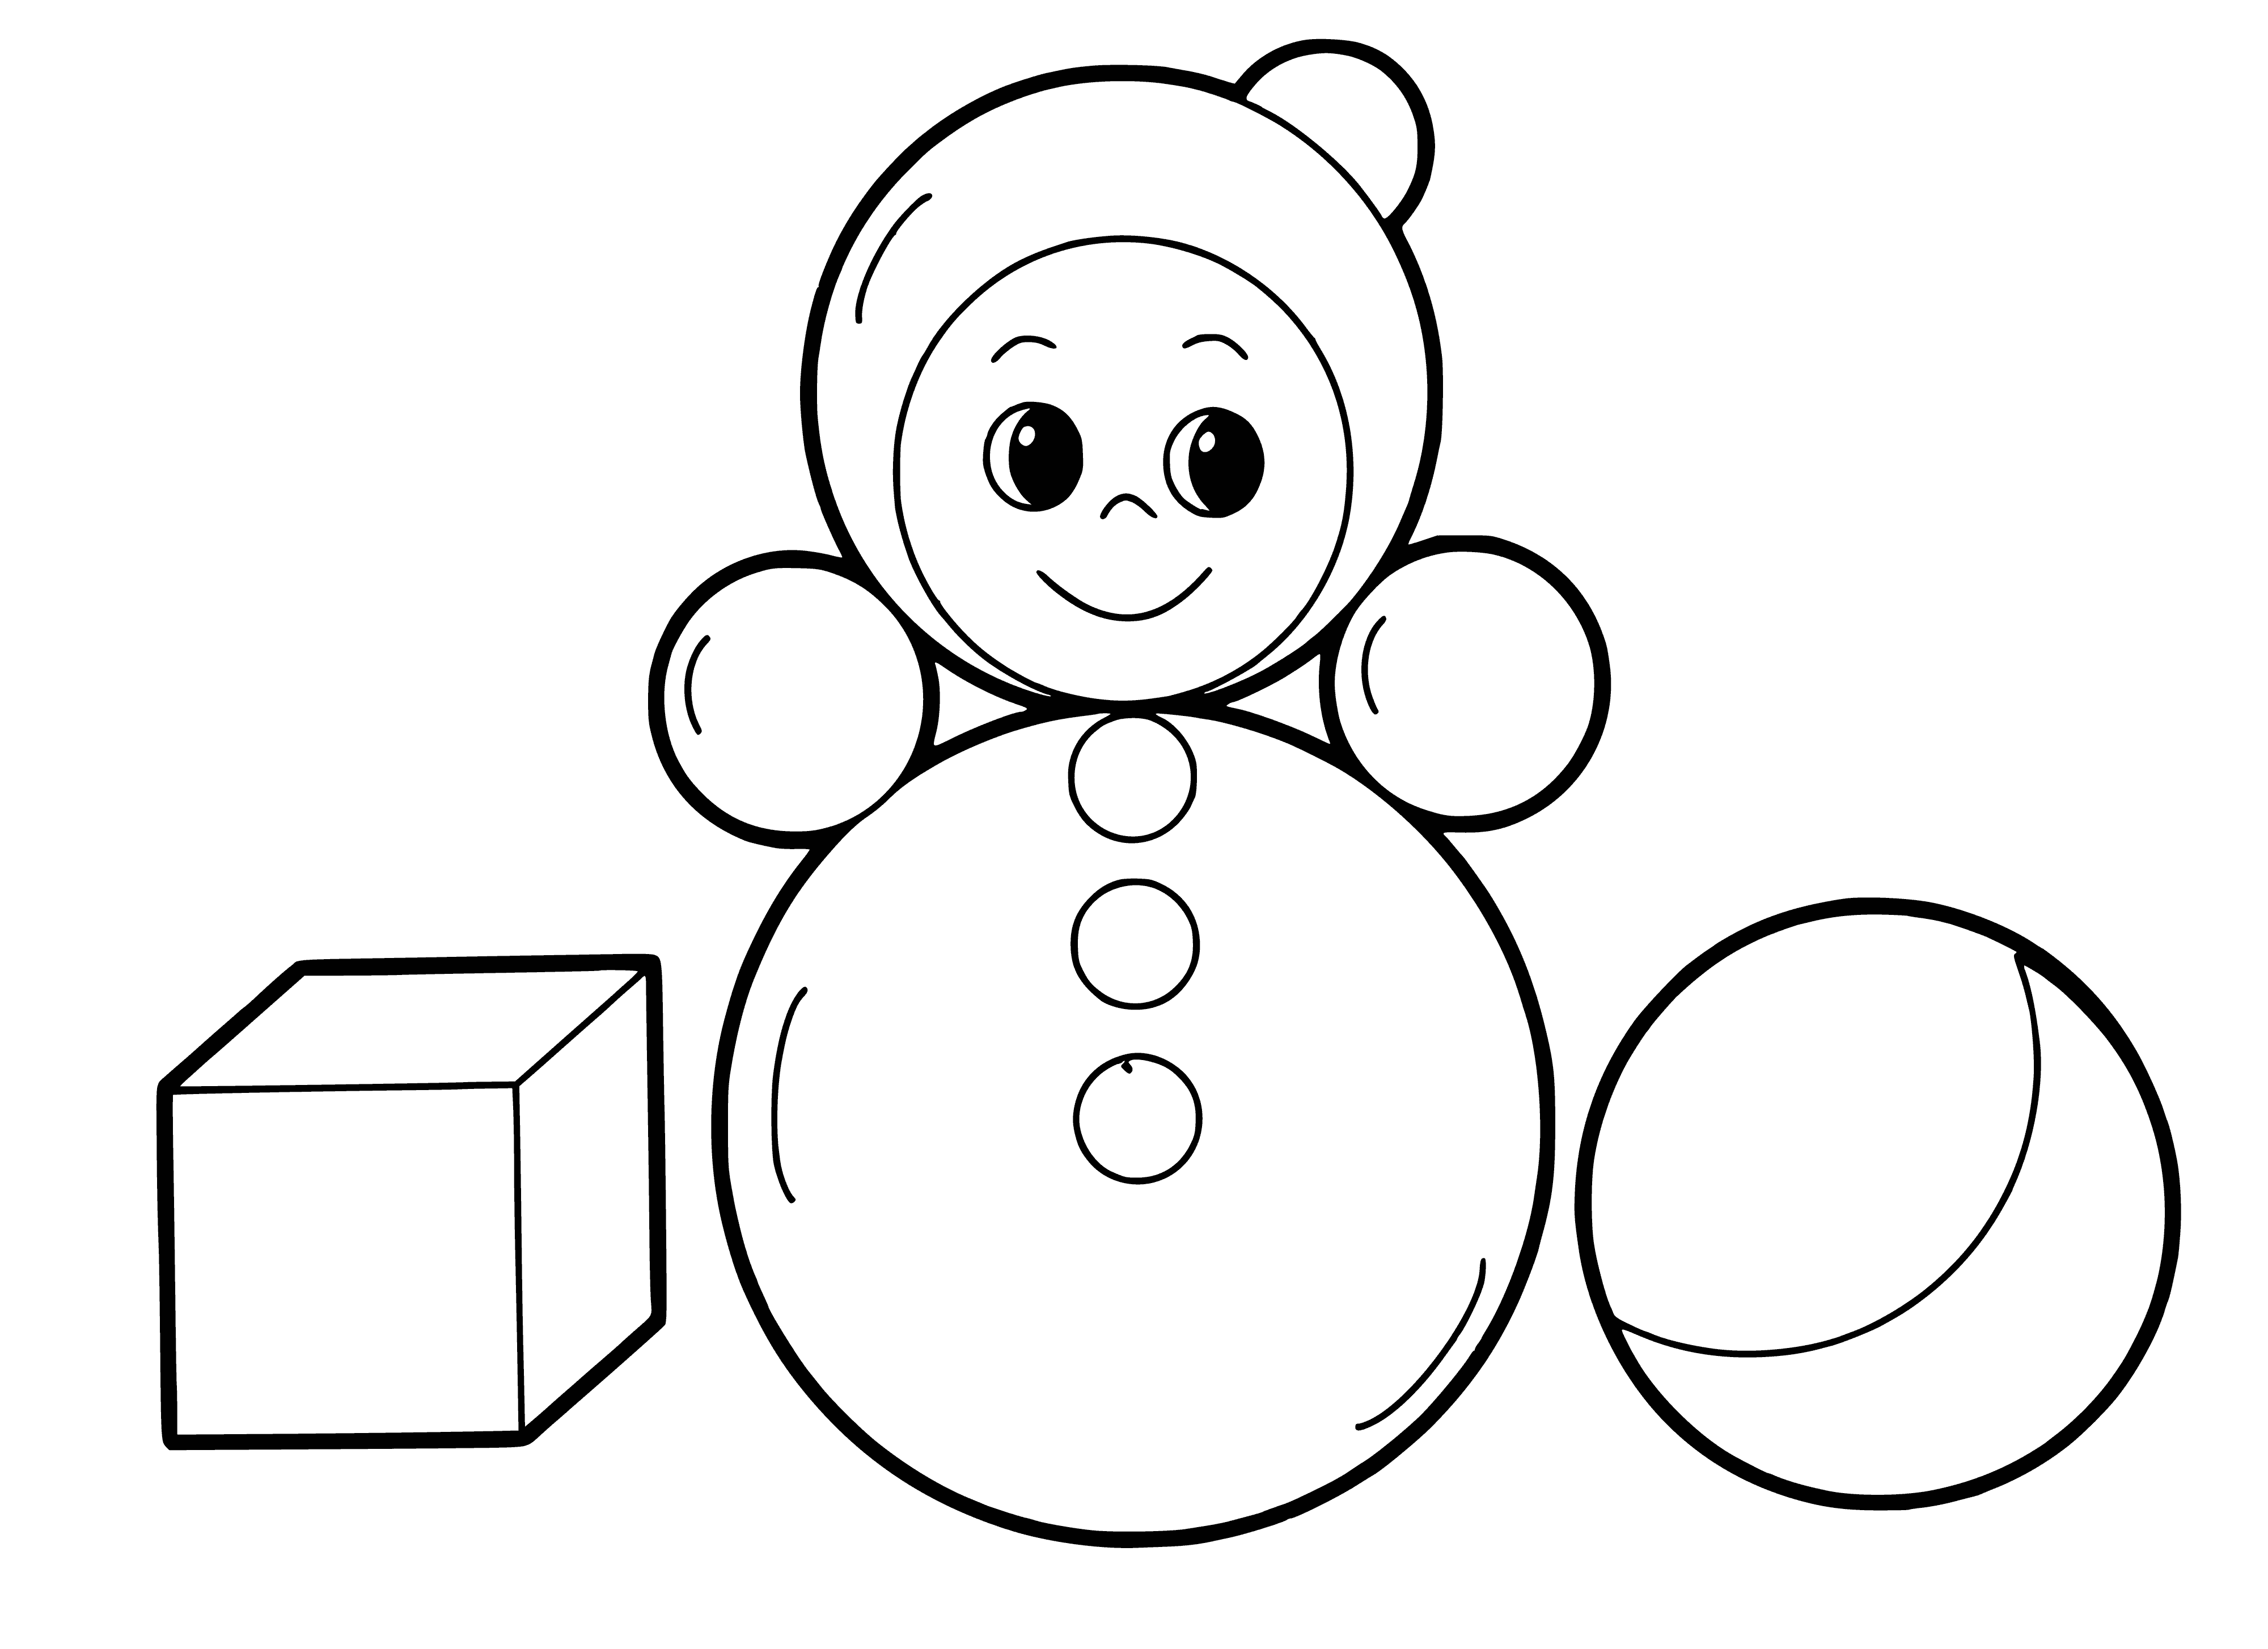 Tumbler coloring page